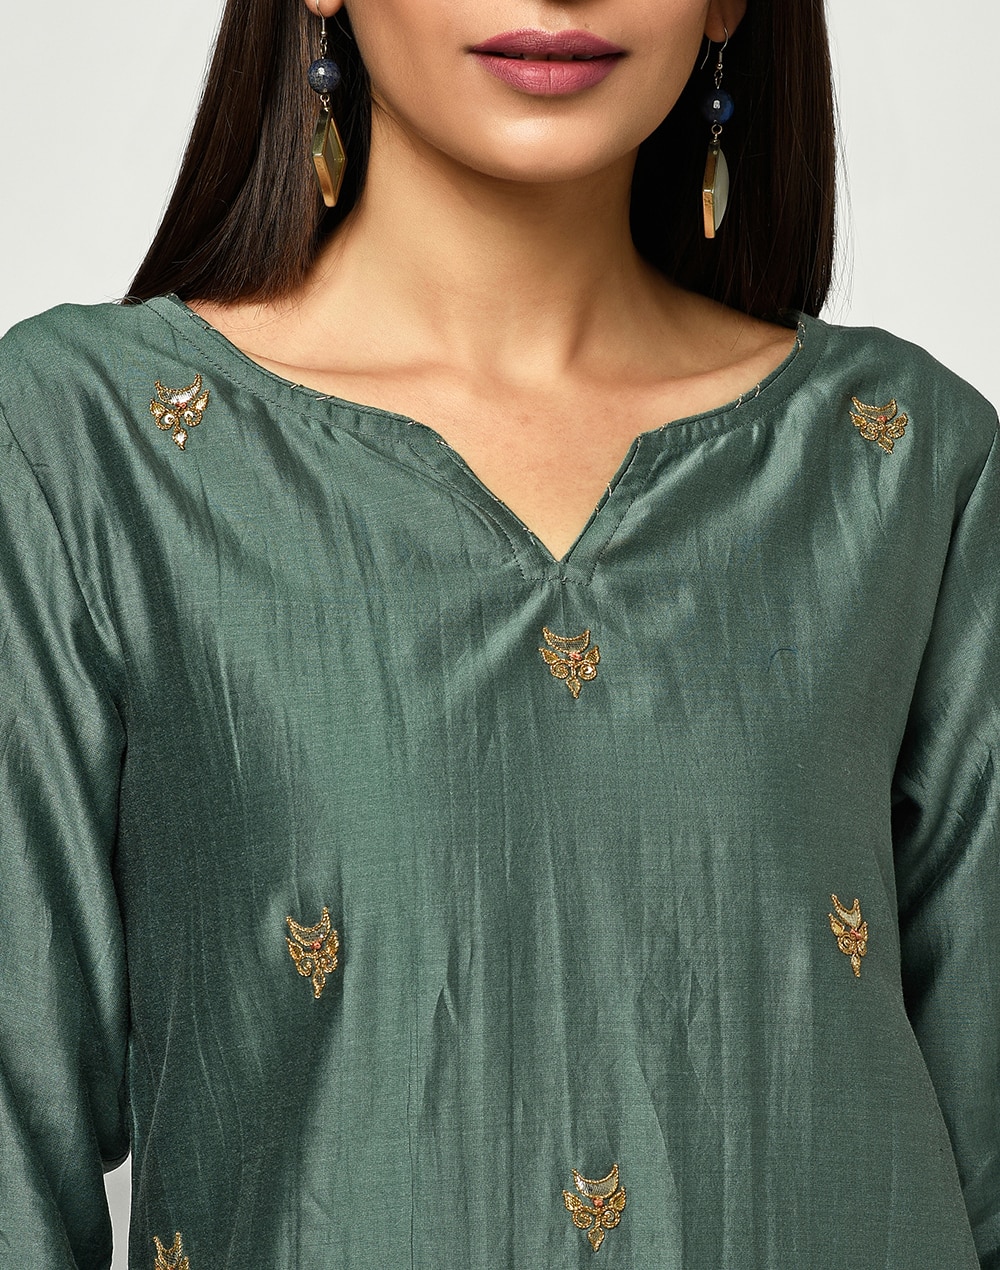 Buy Nuindian Green Cotton Silk Embroidered 2pc Kurta Set For Women Online At Fabindia 10675599